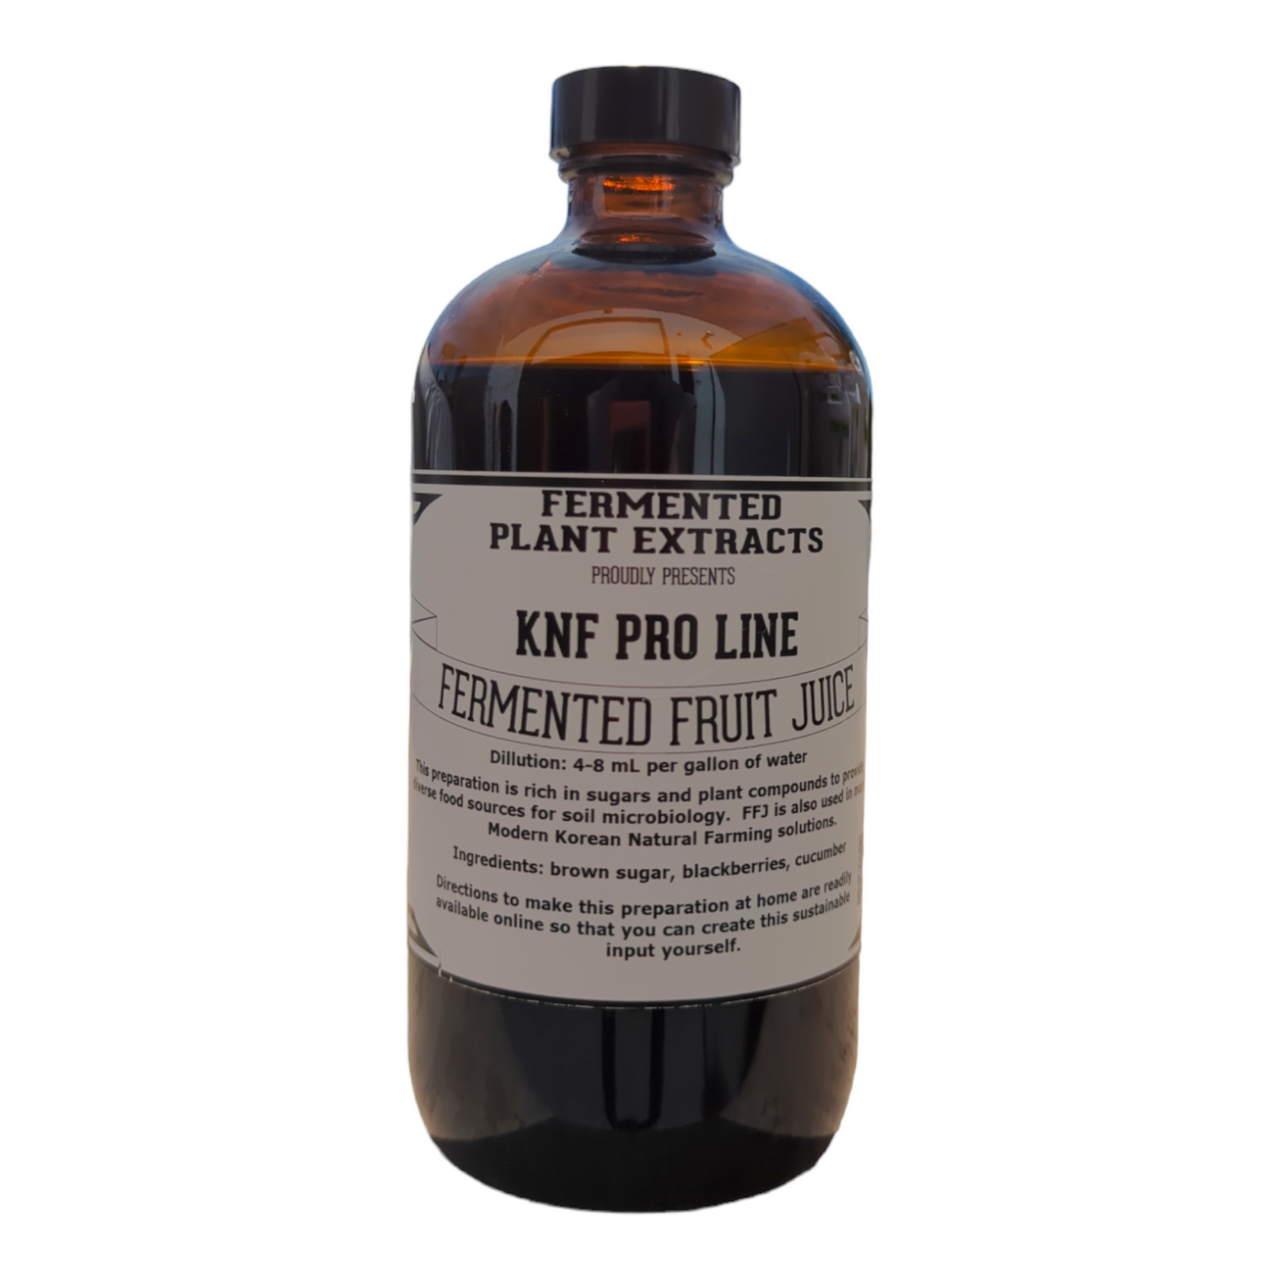 KNF Pro Line